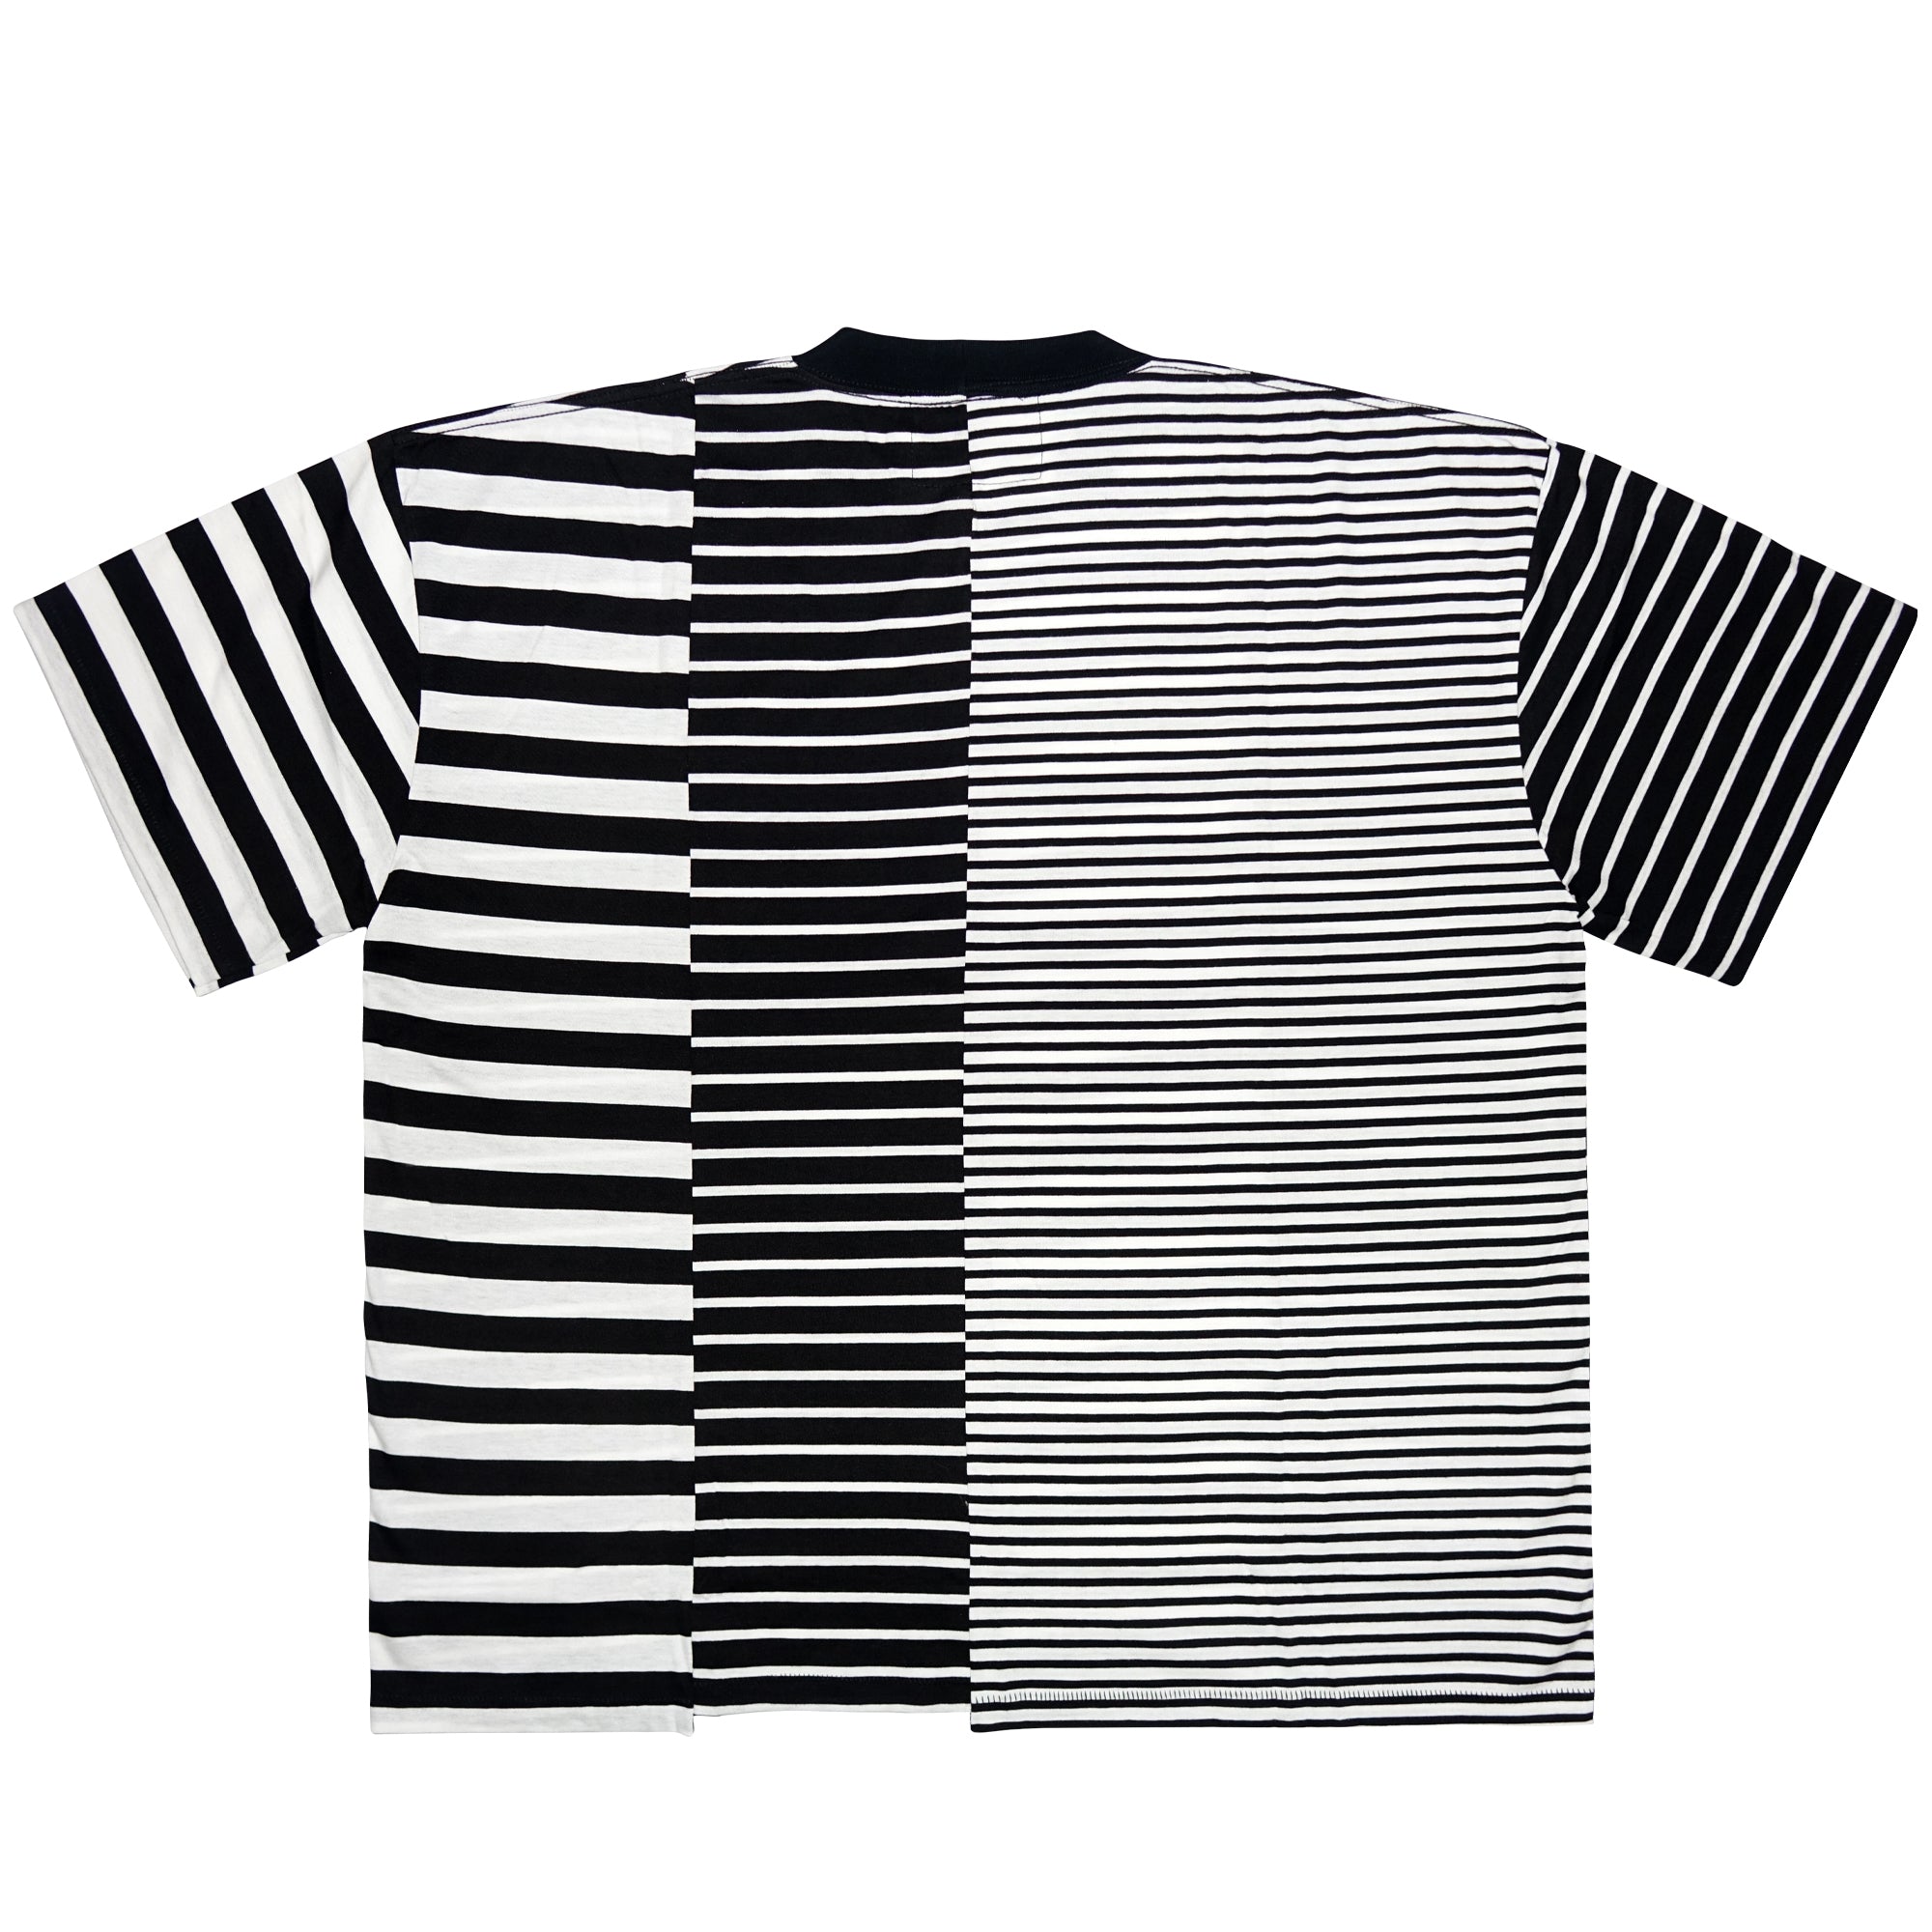 The Salvages Reconstructed Stripe OS T-Shirt in Black and White